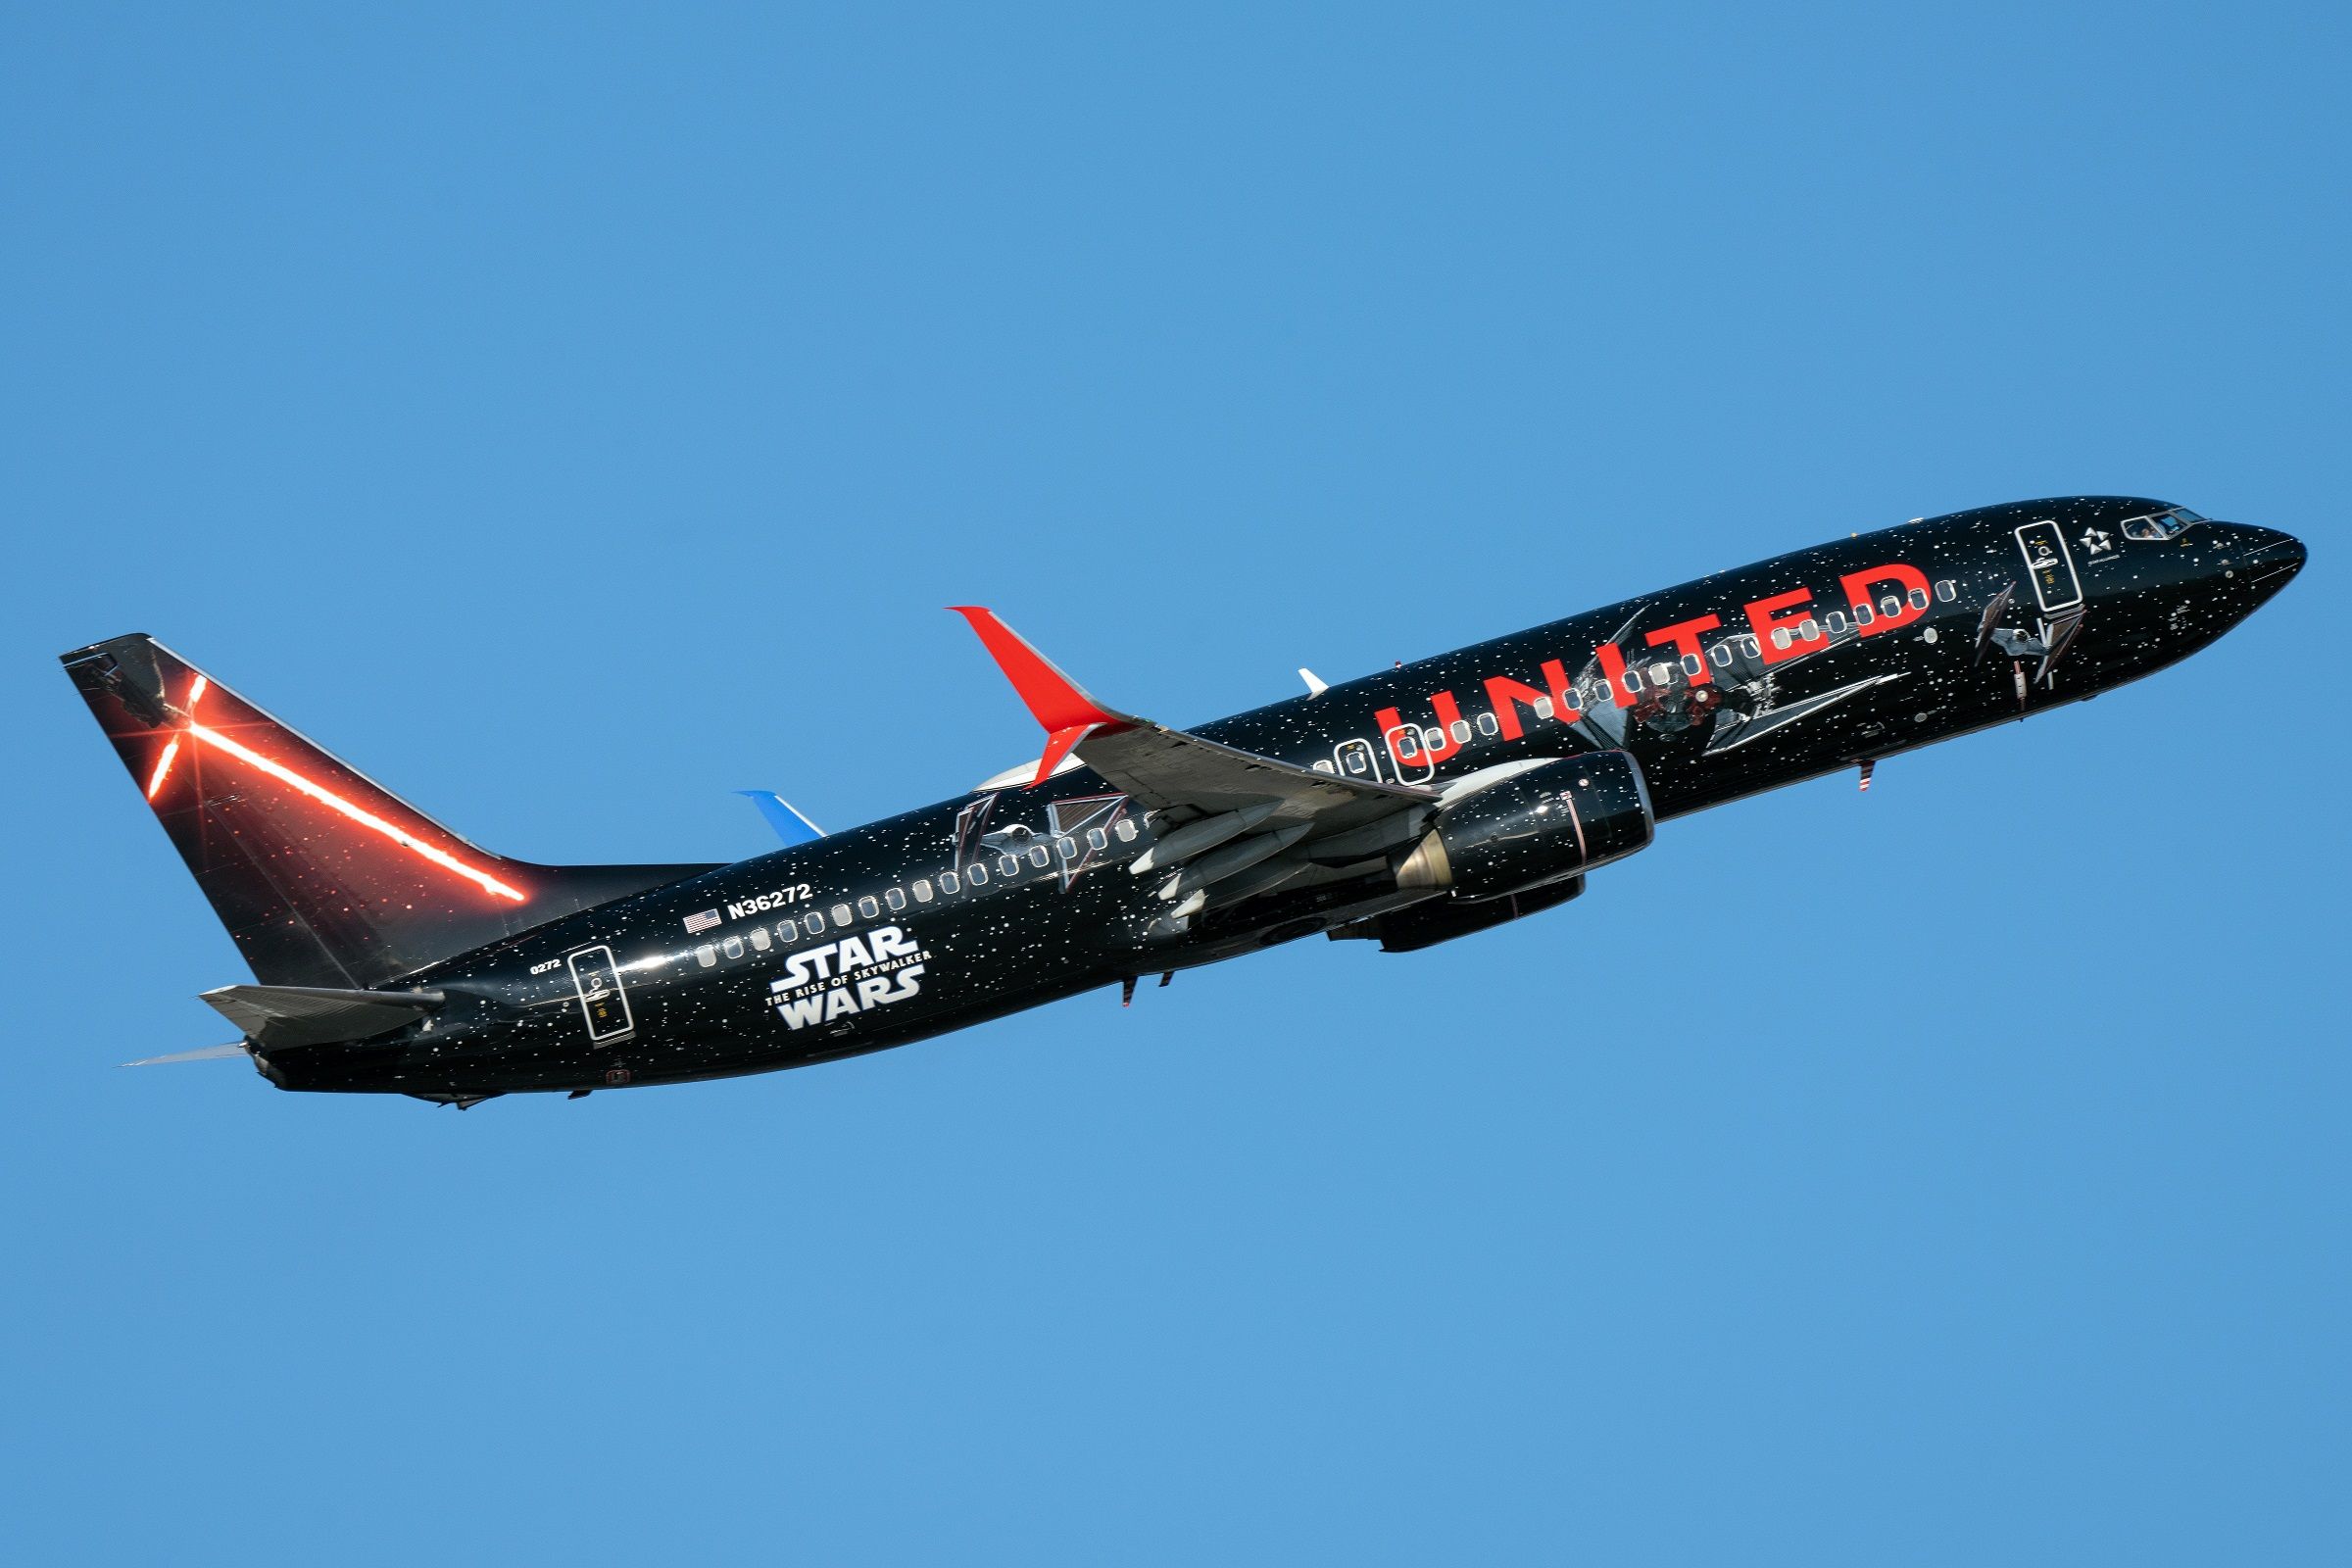 United AIrlines (Star Wars-The Rise of Skywalker Livery) Boeing 737-824 N36272